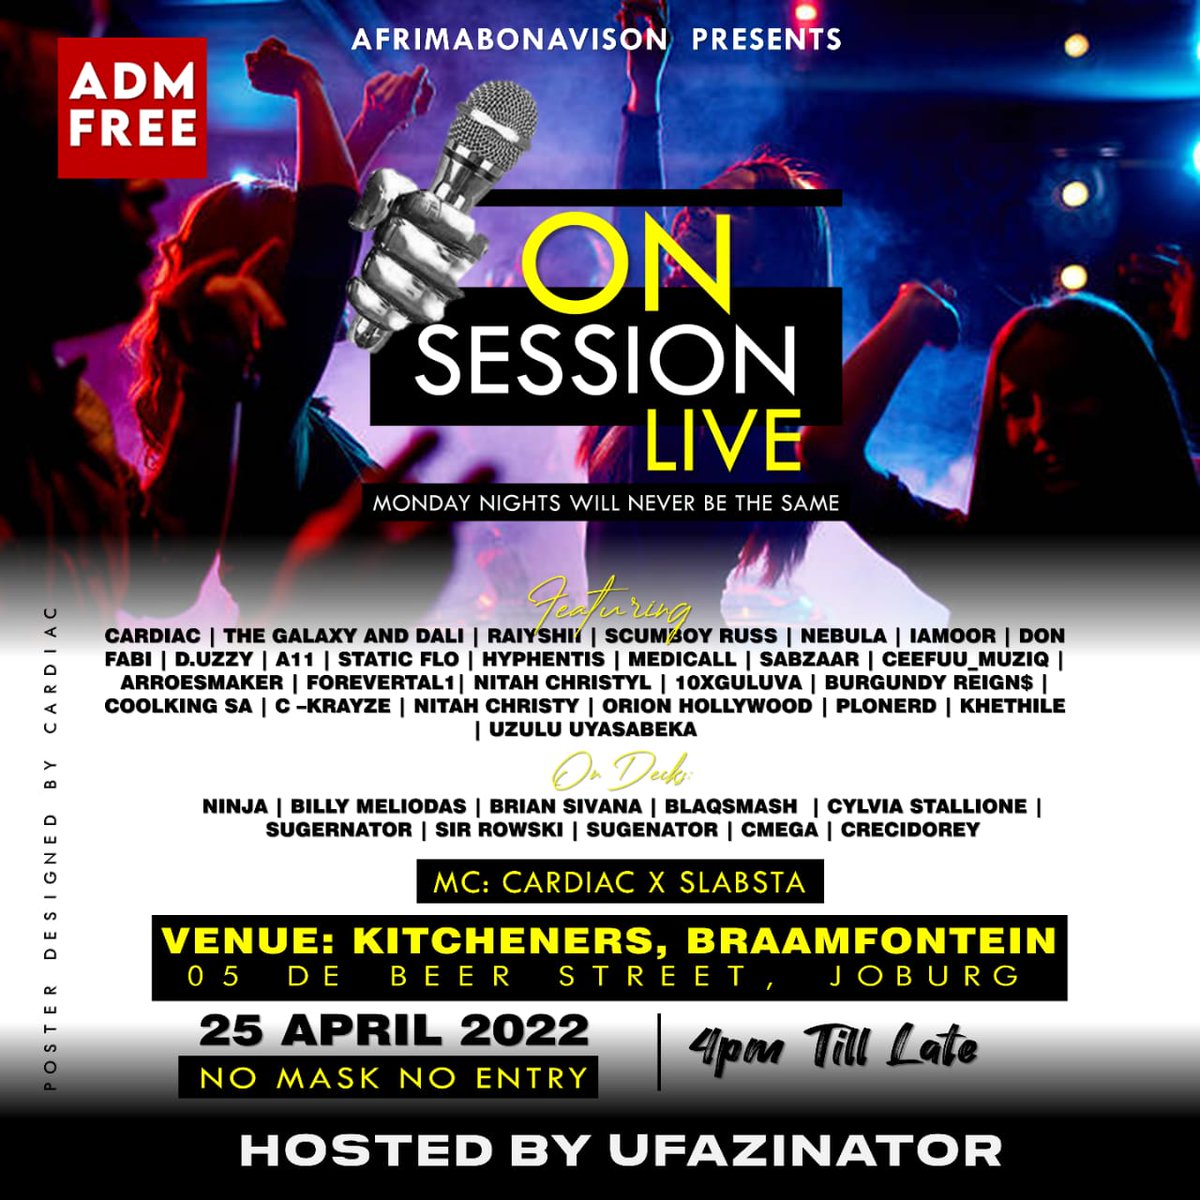 Next on #OnSessionLive 🔥

Live Performances | Live Deejays | Hookah for hire | 4pm till late | 25 April #NoMaskNoEntry

📍 5 De Beer Street @BarKitcheners

Mc @CardiacMusicSA & @Slabsta
Hosted by @UFazinator